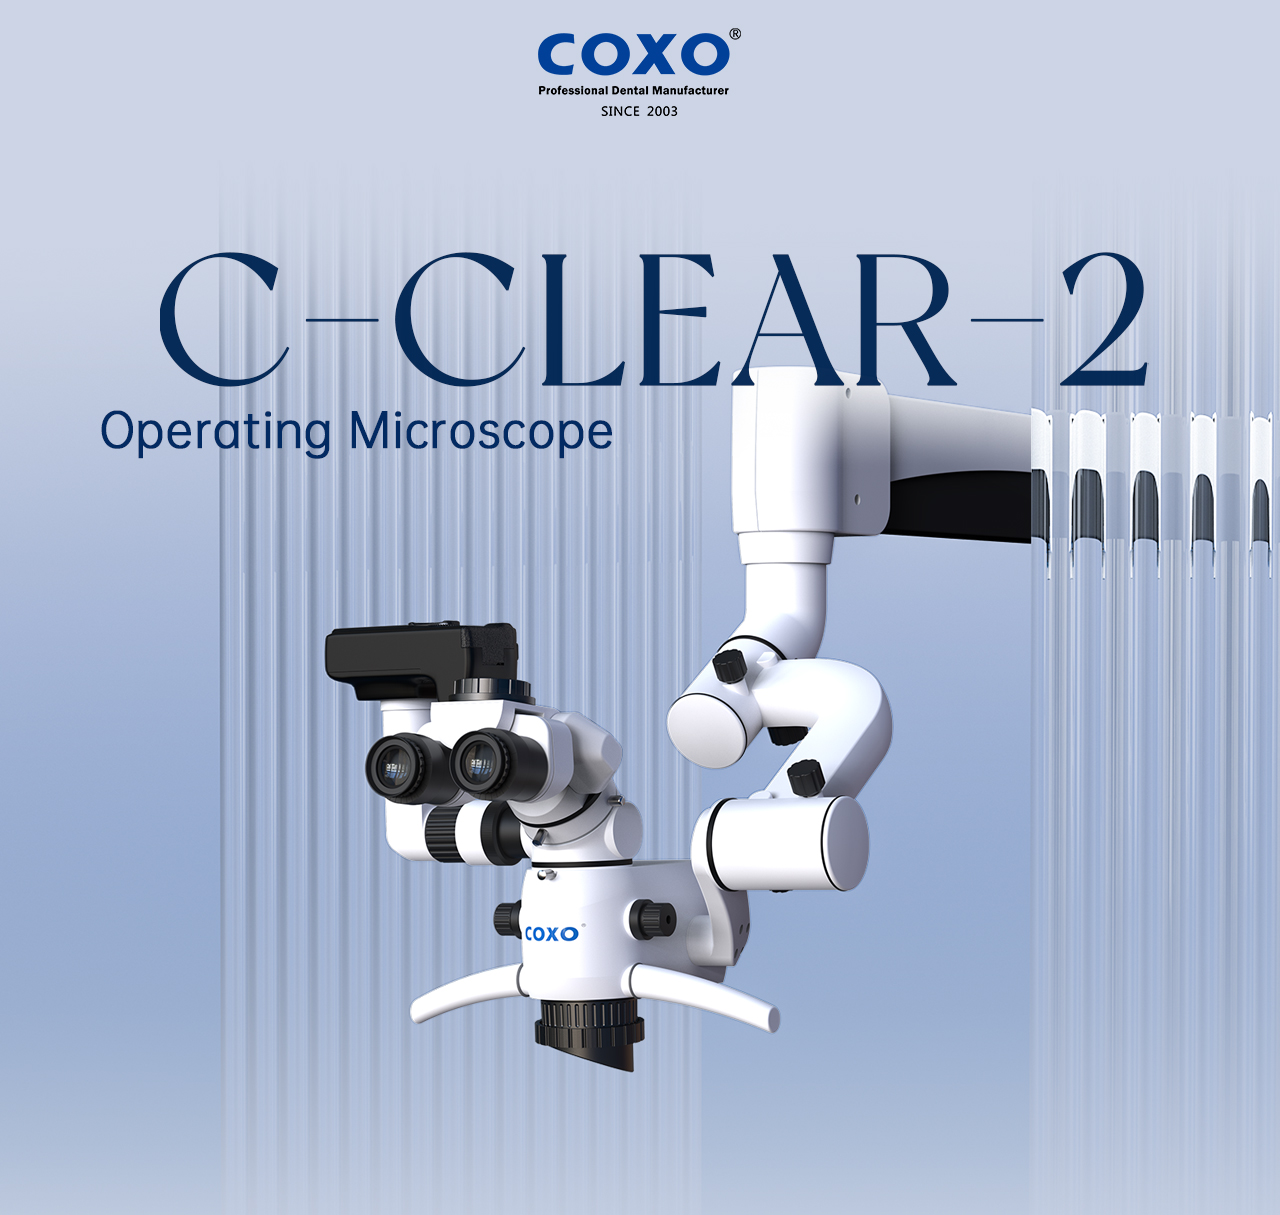 C-CLEAR-2